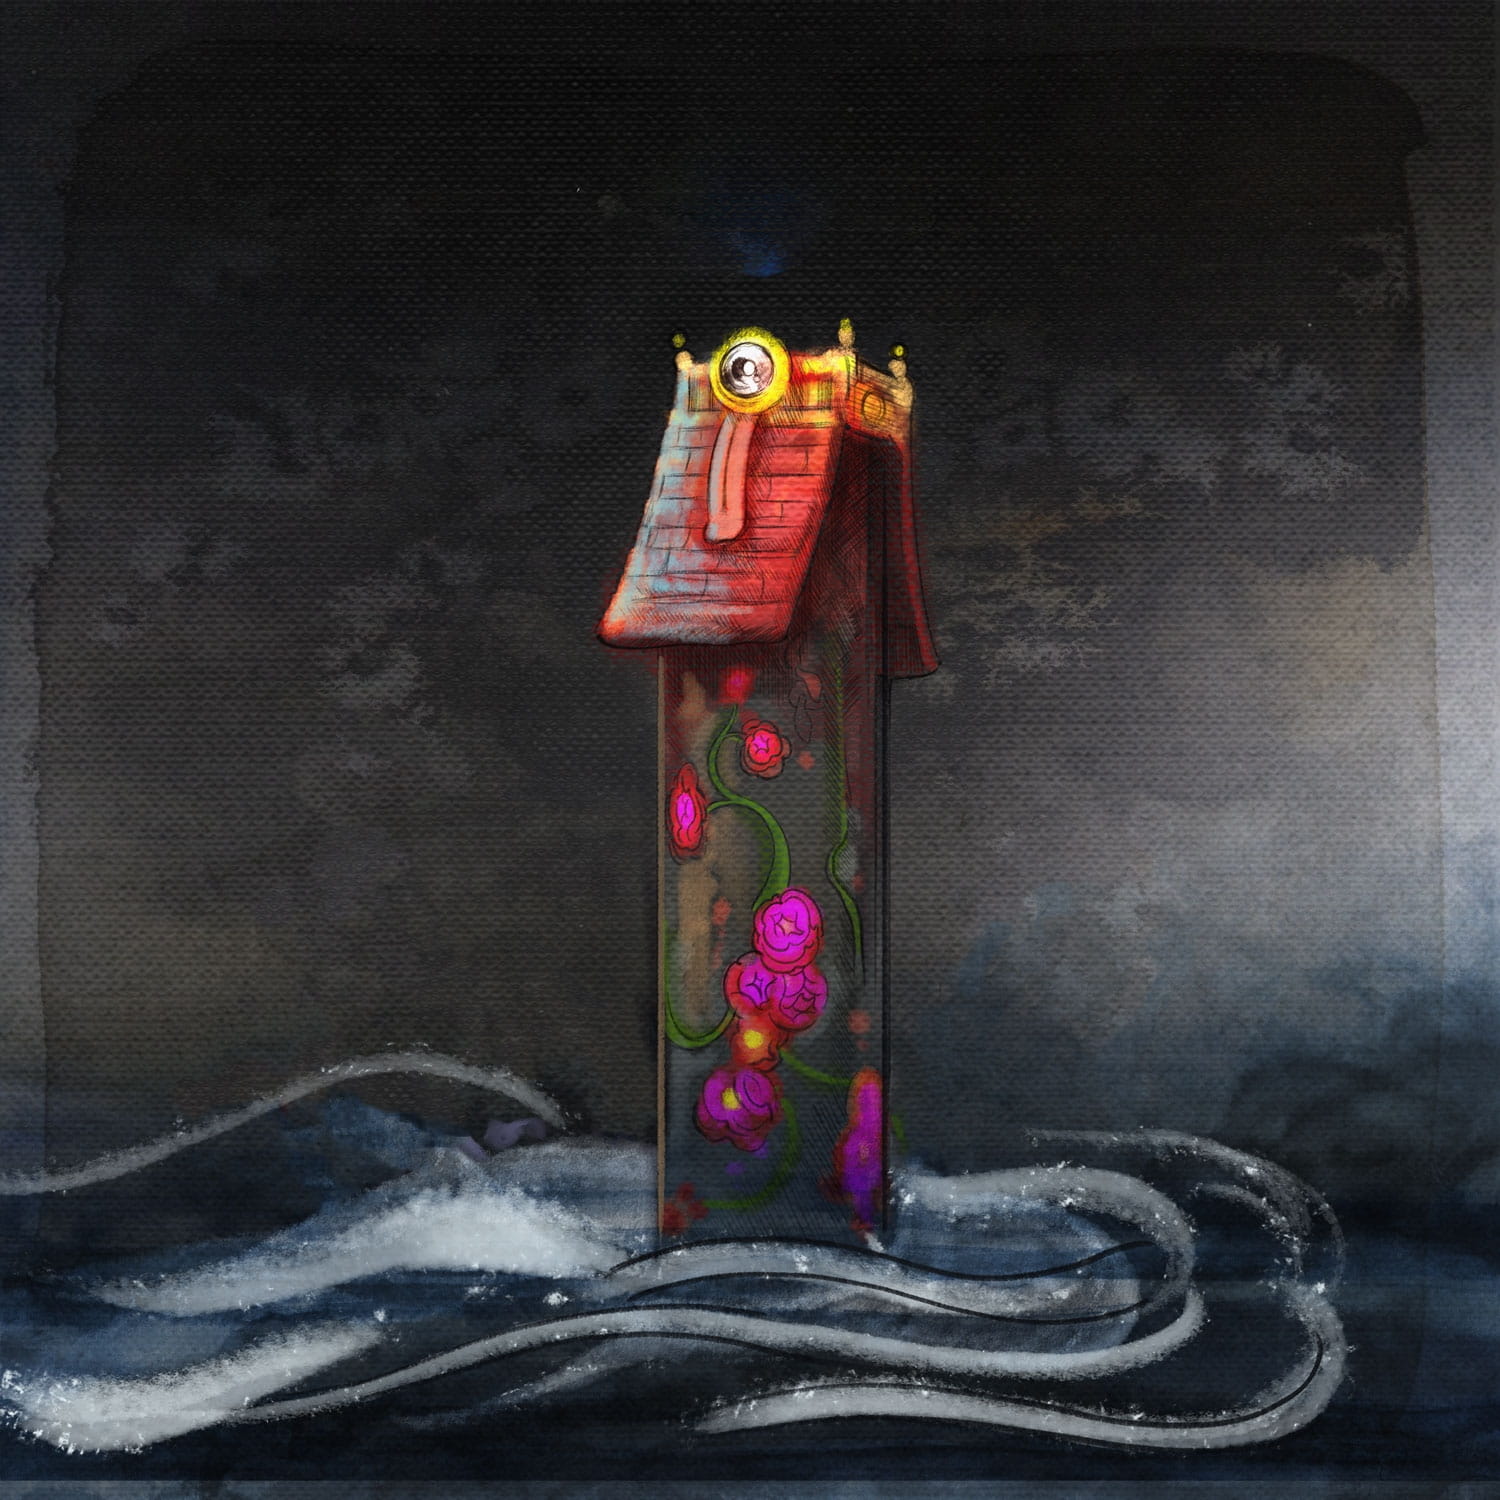 A tower with painted stalks and flowers on its walls and an eyelike lookout atop it rising above a grey, wavy ocean.